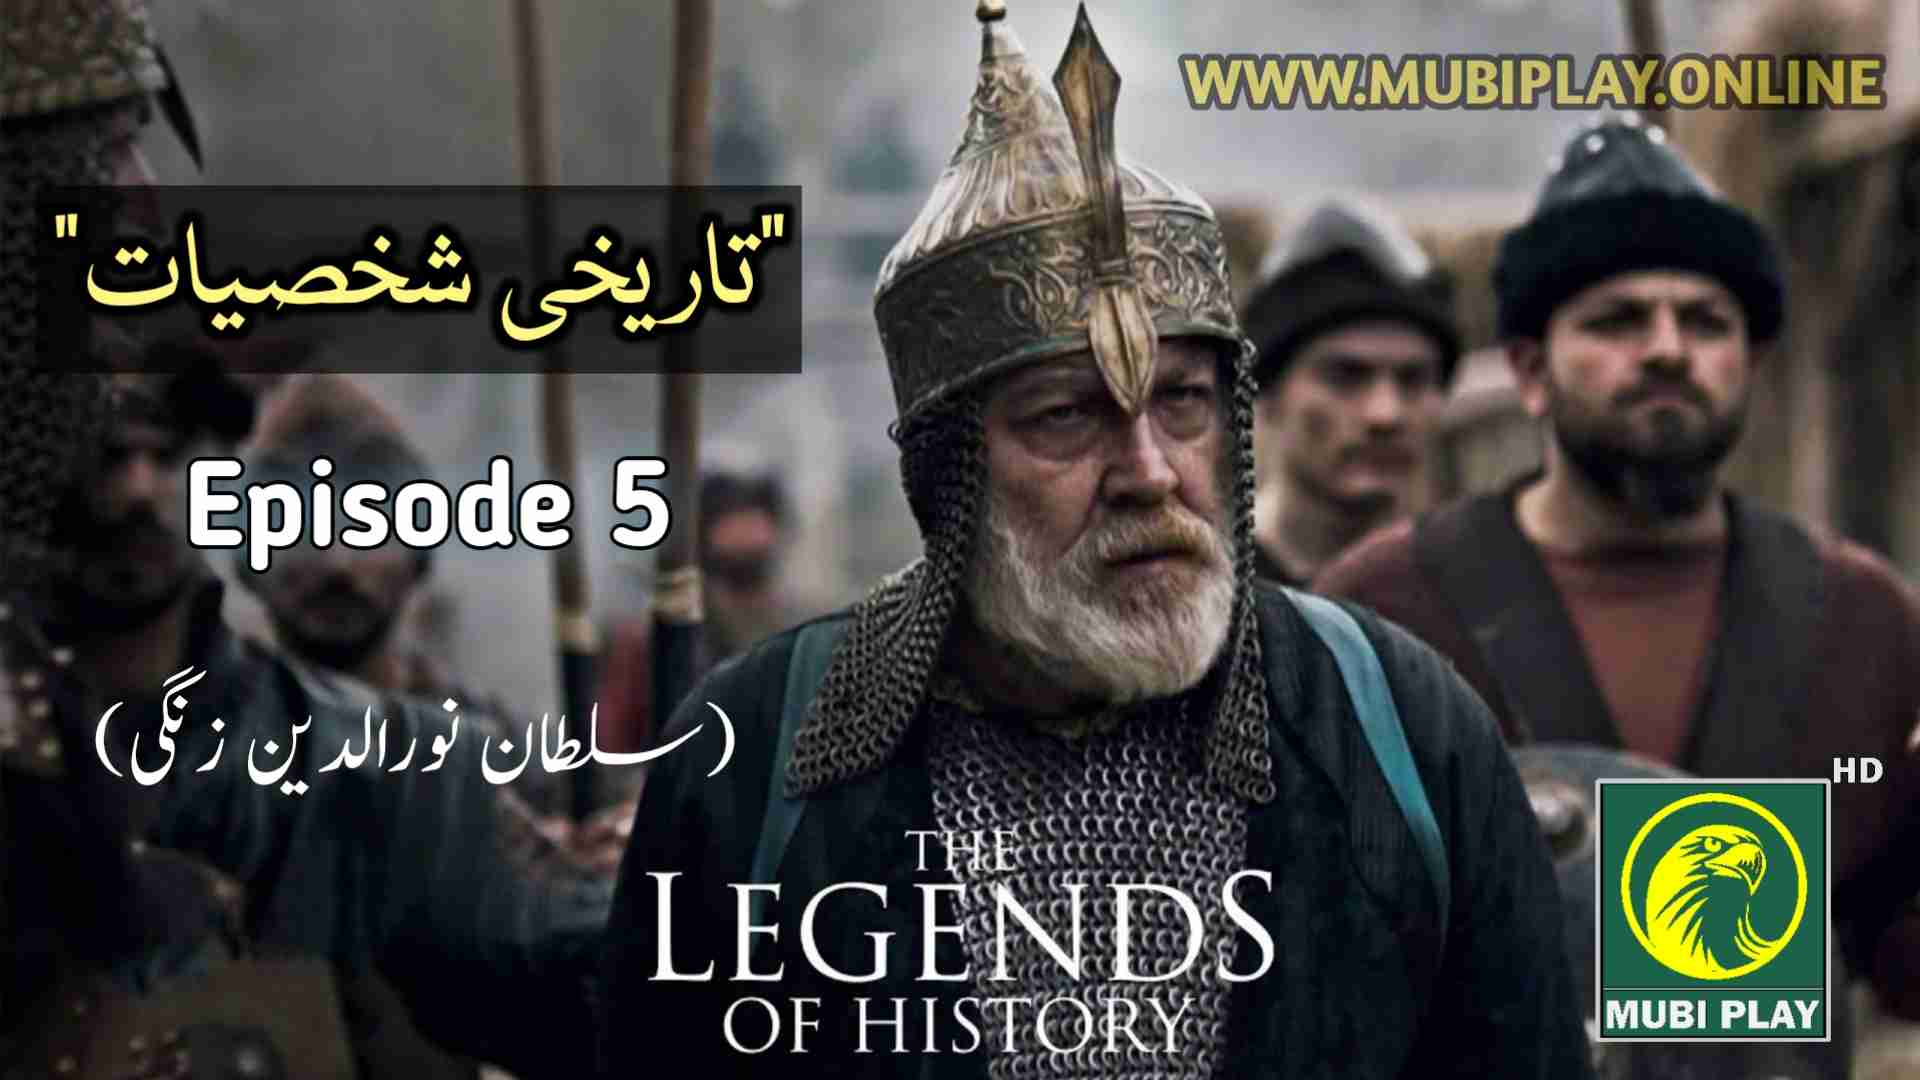 Legends of History Episode 5 with Urdu Subtitles by MubiPlay